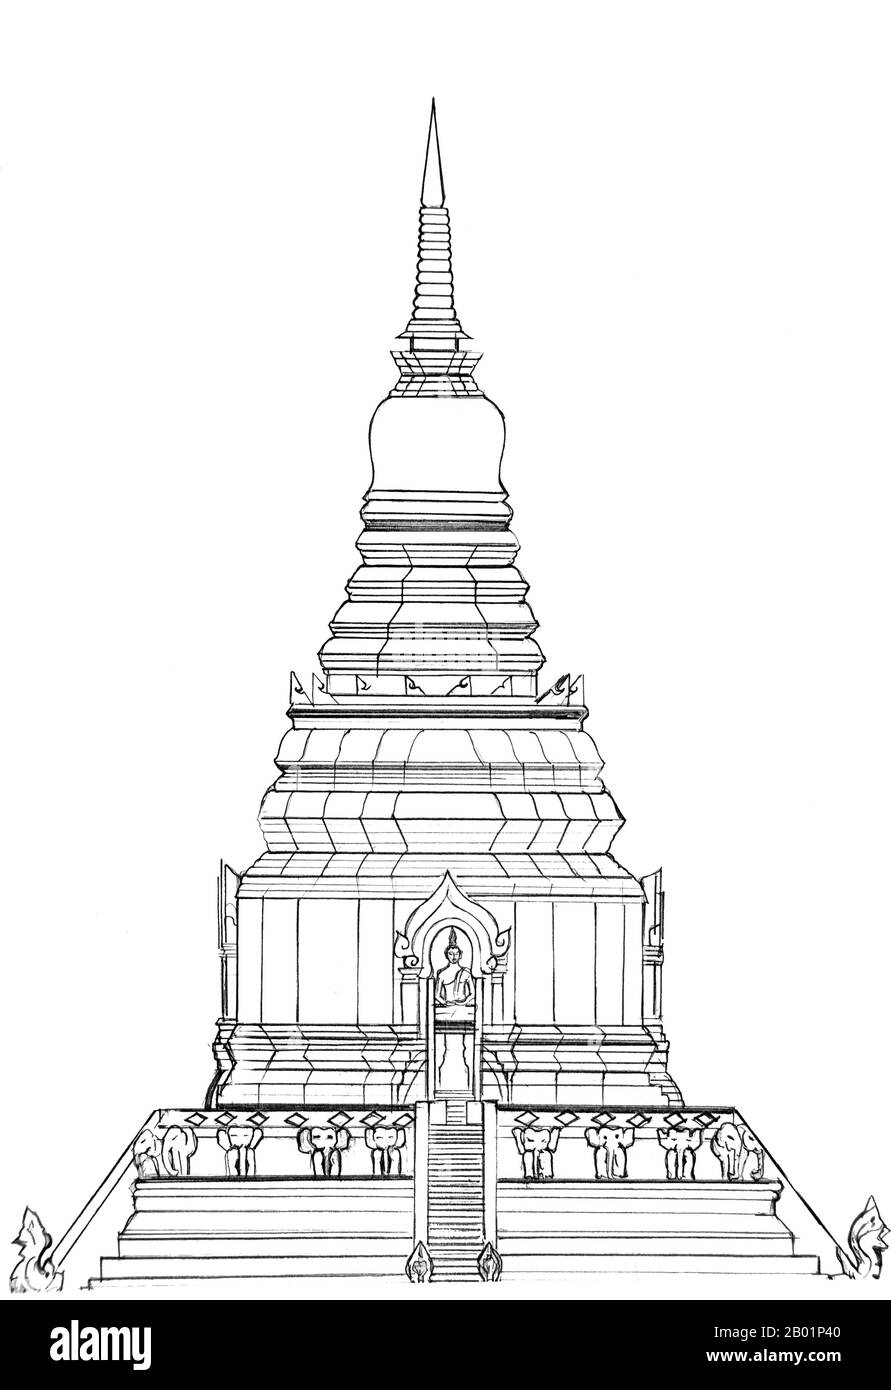 Thailand: Architectural drawing of presumed original form of Chiang Mai’s Chedi Luang before the 1545 earthquake. View of east side, seen from main entrance.  Wat Chedi Luang translates literally from the Thai as ‘Monastery of the Great Stupa’. Construction of the temple began at the end of the 14th century when the Lan Na Kingdom was in its prime. King Saen Muang Ma (1385-1401) intended it as the site of a great reliquary to enshrine the ashes of his father, King Ku Na (1355-1385). Today it is the the site of the Lak Muang or City Pillar. Stock Photo